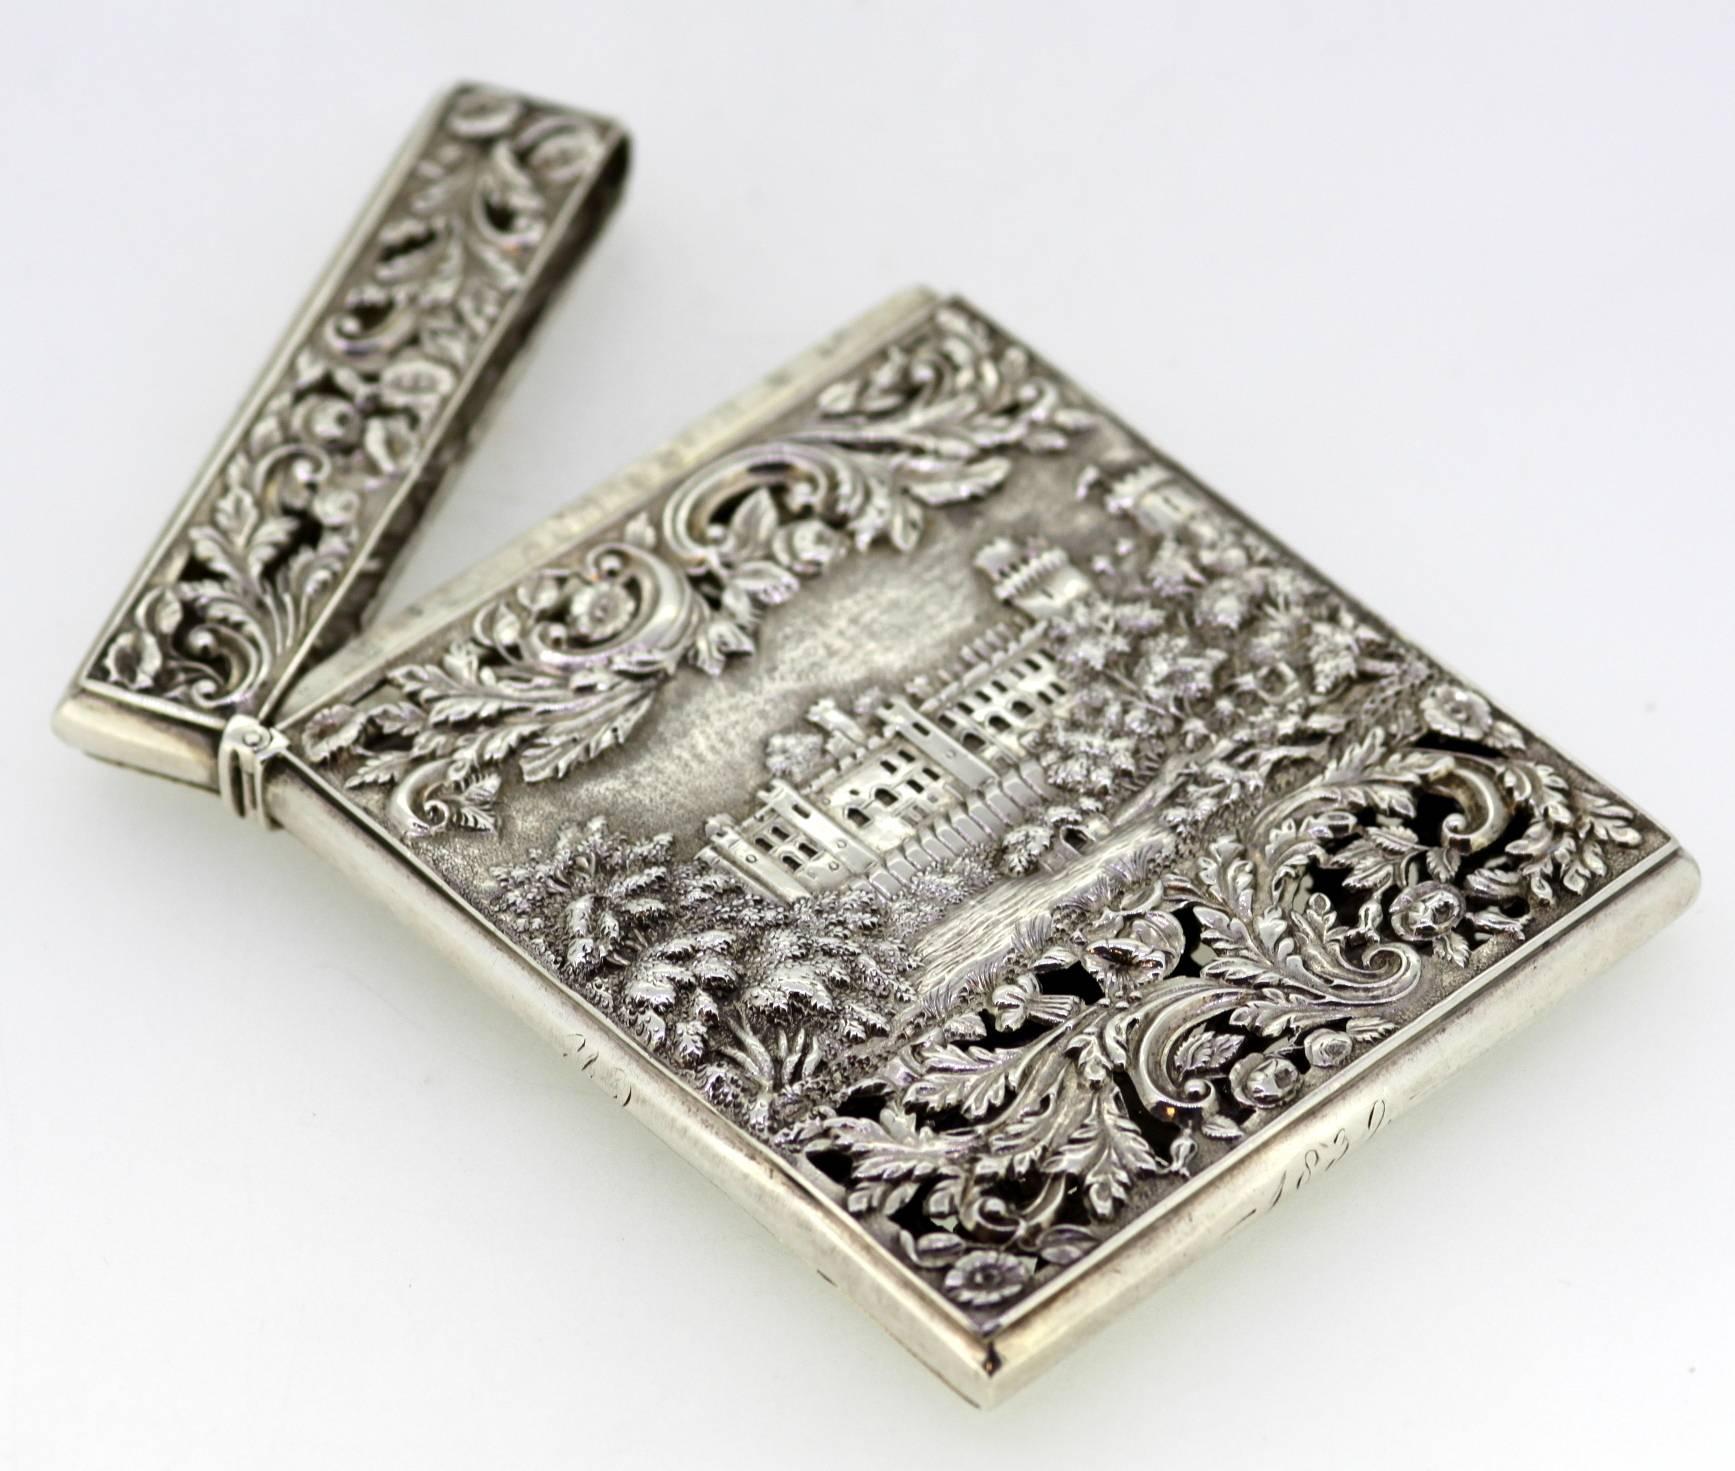 Victorian silver card case with Kenilworth castle engravings
Made in Birmingham, 1838
Maker: Nathaniel Mills
Fully hallmarked.

Dimensions - 
Size: 9.7 x 7.2 x 0.9 cm
Weight: 80 grams

Condition: General wear, overall fantastic and pleasant